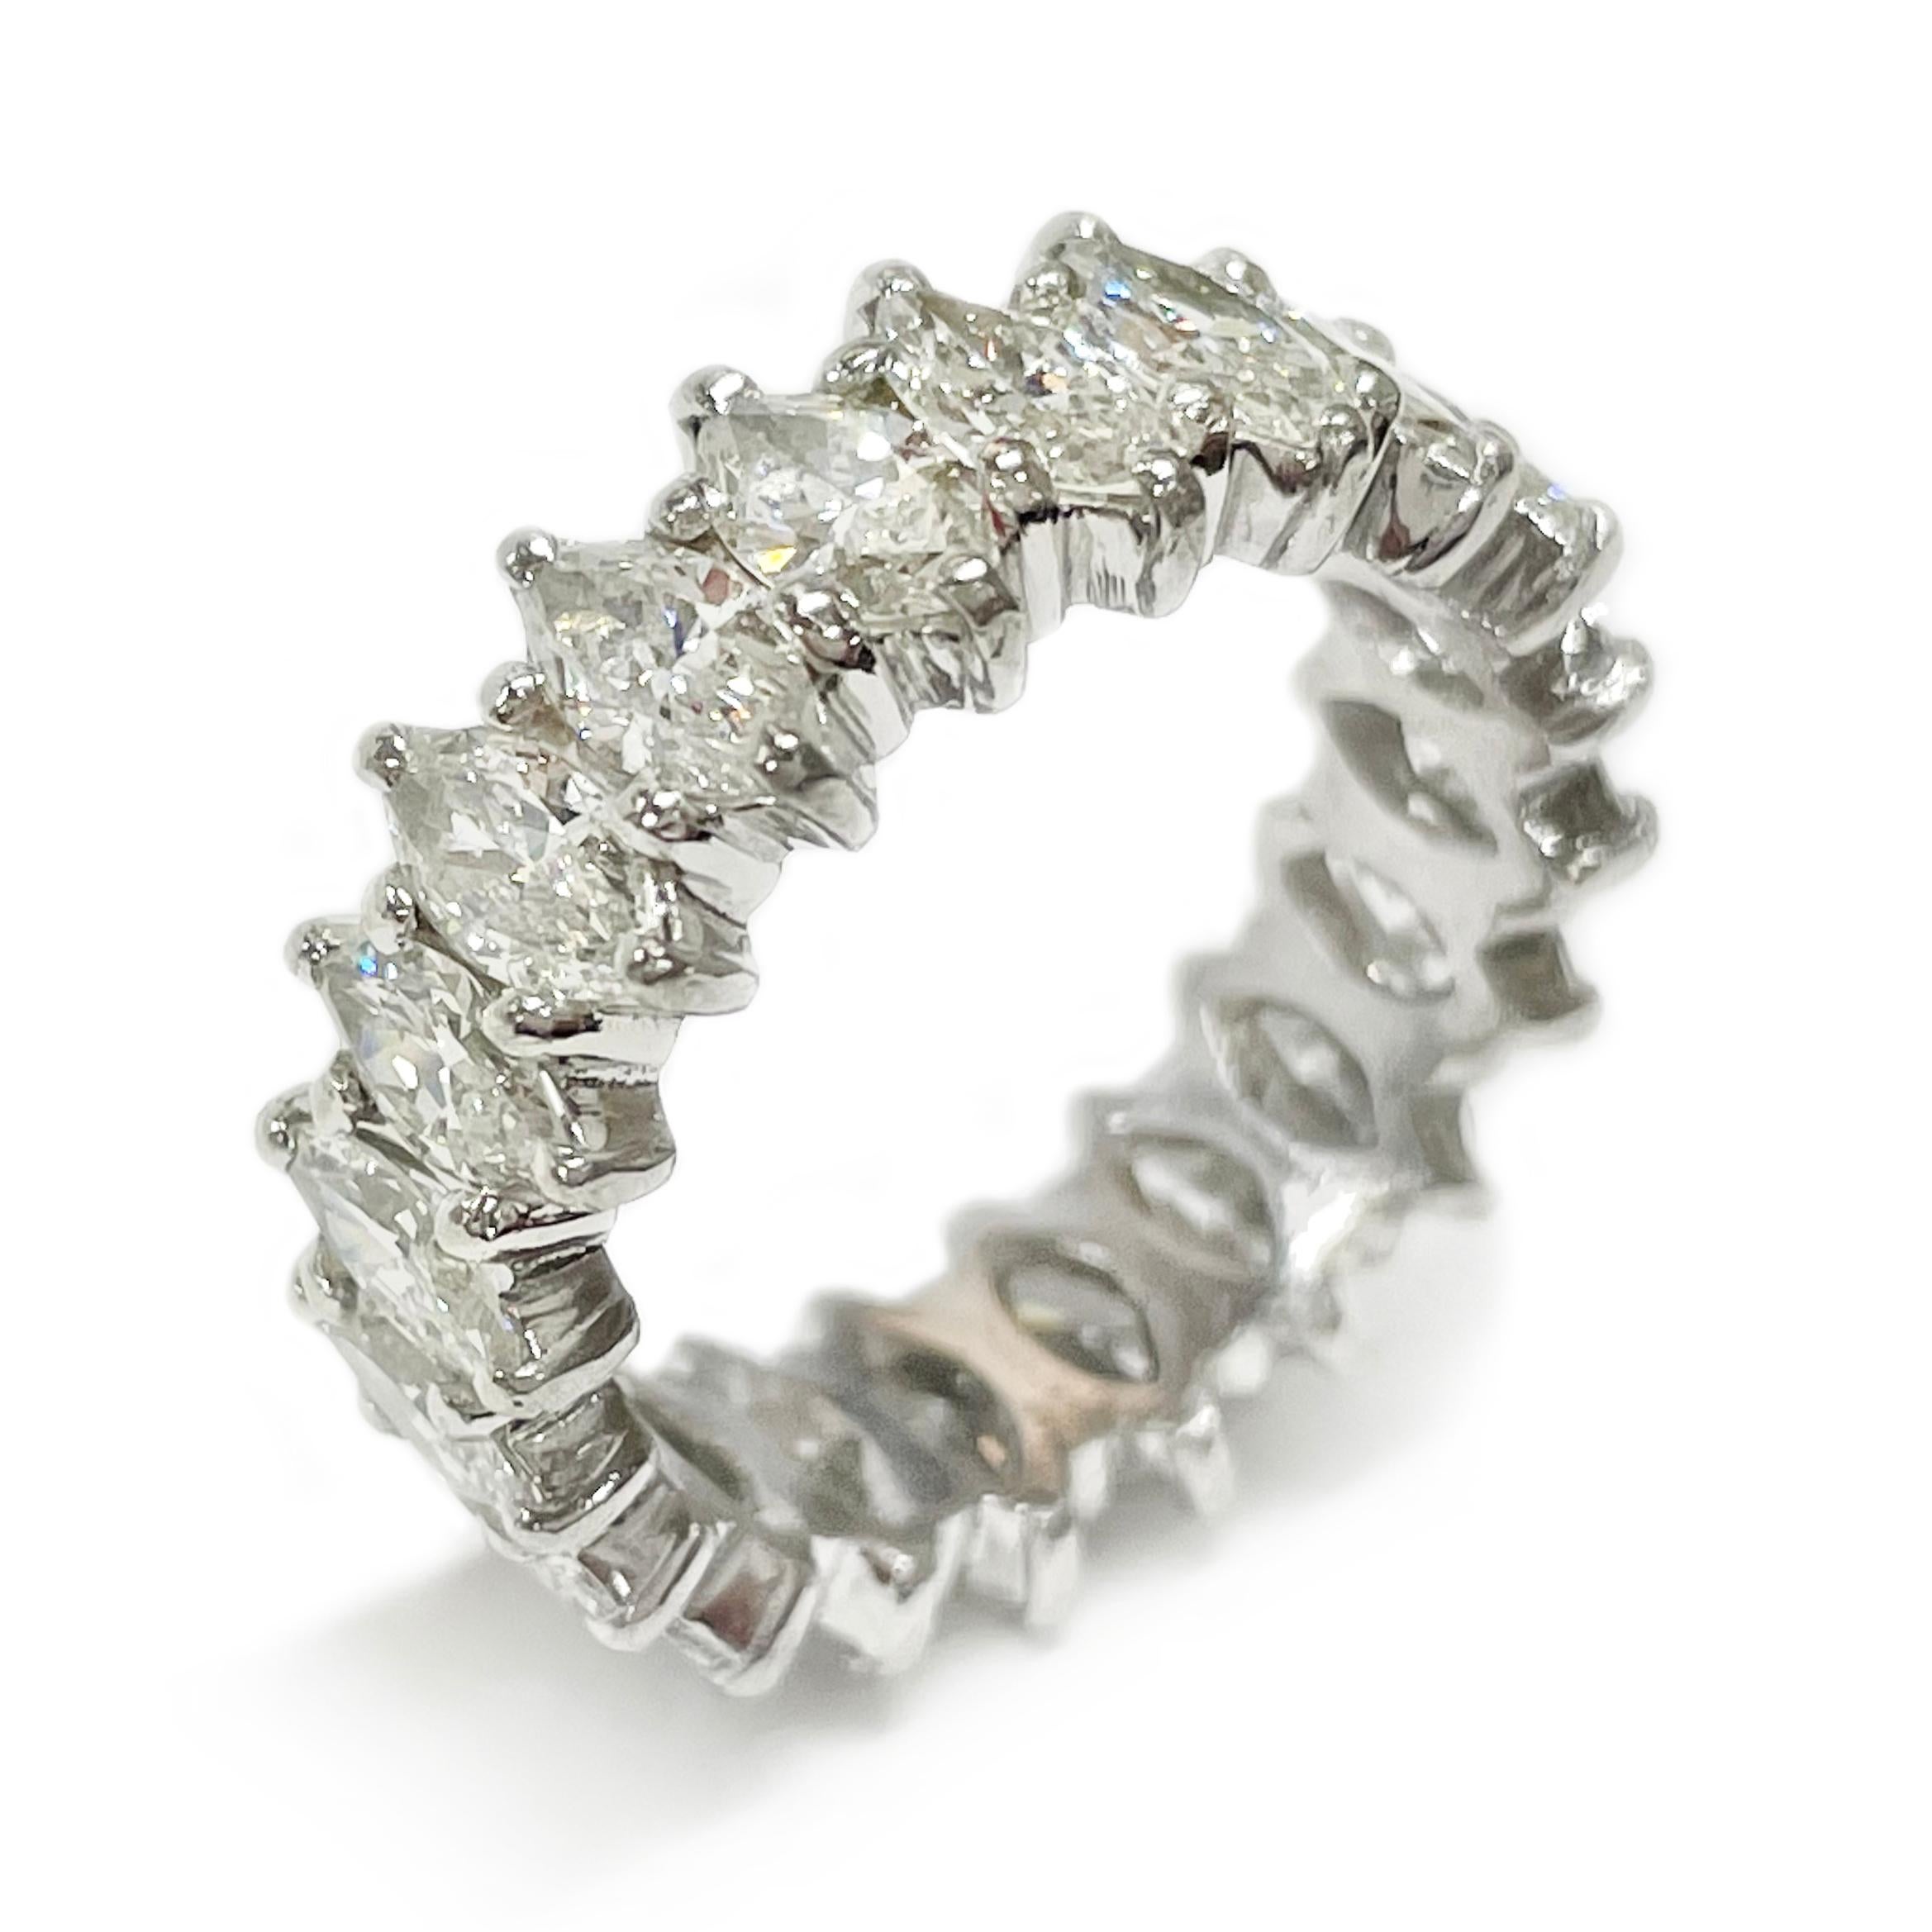 Platinum Marquise Diamond Eternity Ring. The ring features twenty 5.5 x 3.5 - 5 x 3mm marquise diamonds prong-set around the eternity ring. The diamonds have a total carat weight of 4.00ctw. All the diamonds are SI1-SI2 in clarity (G.I.A.) and G-H